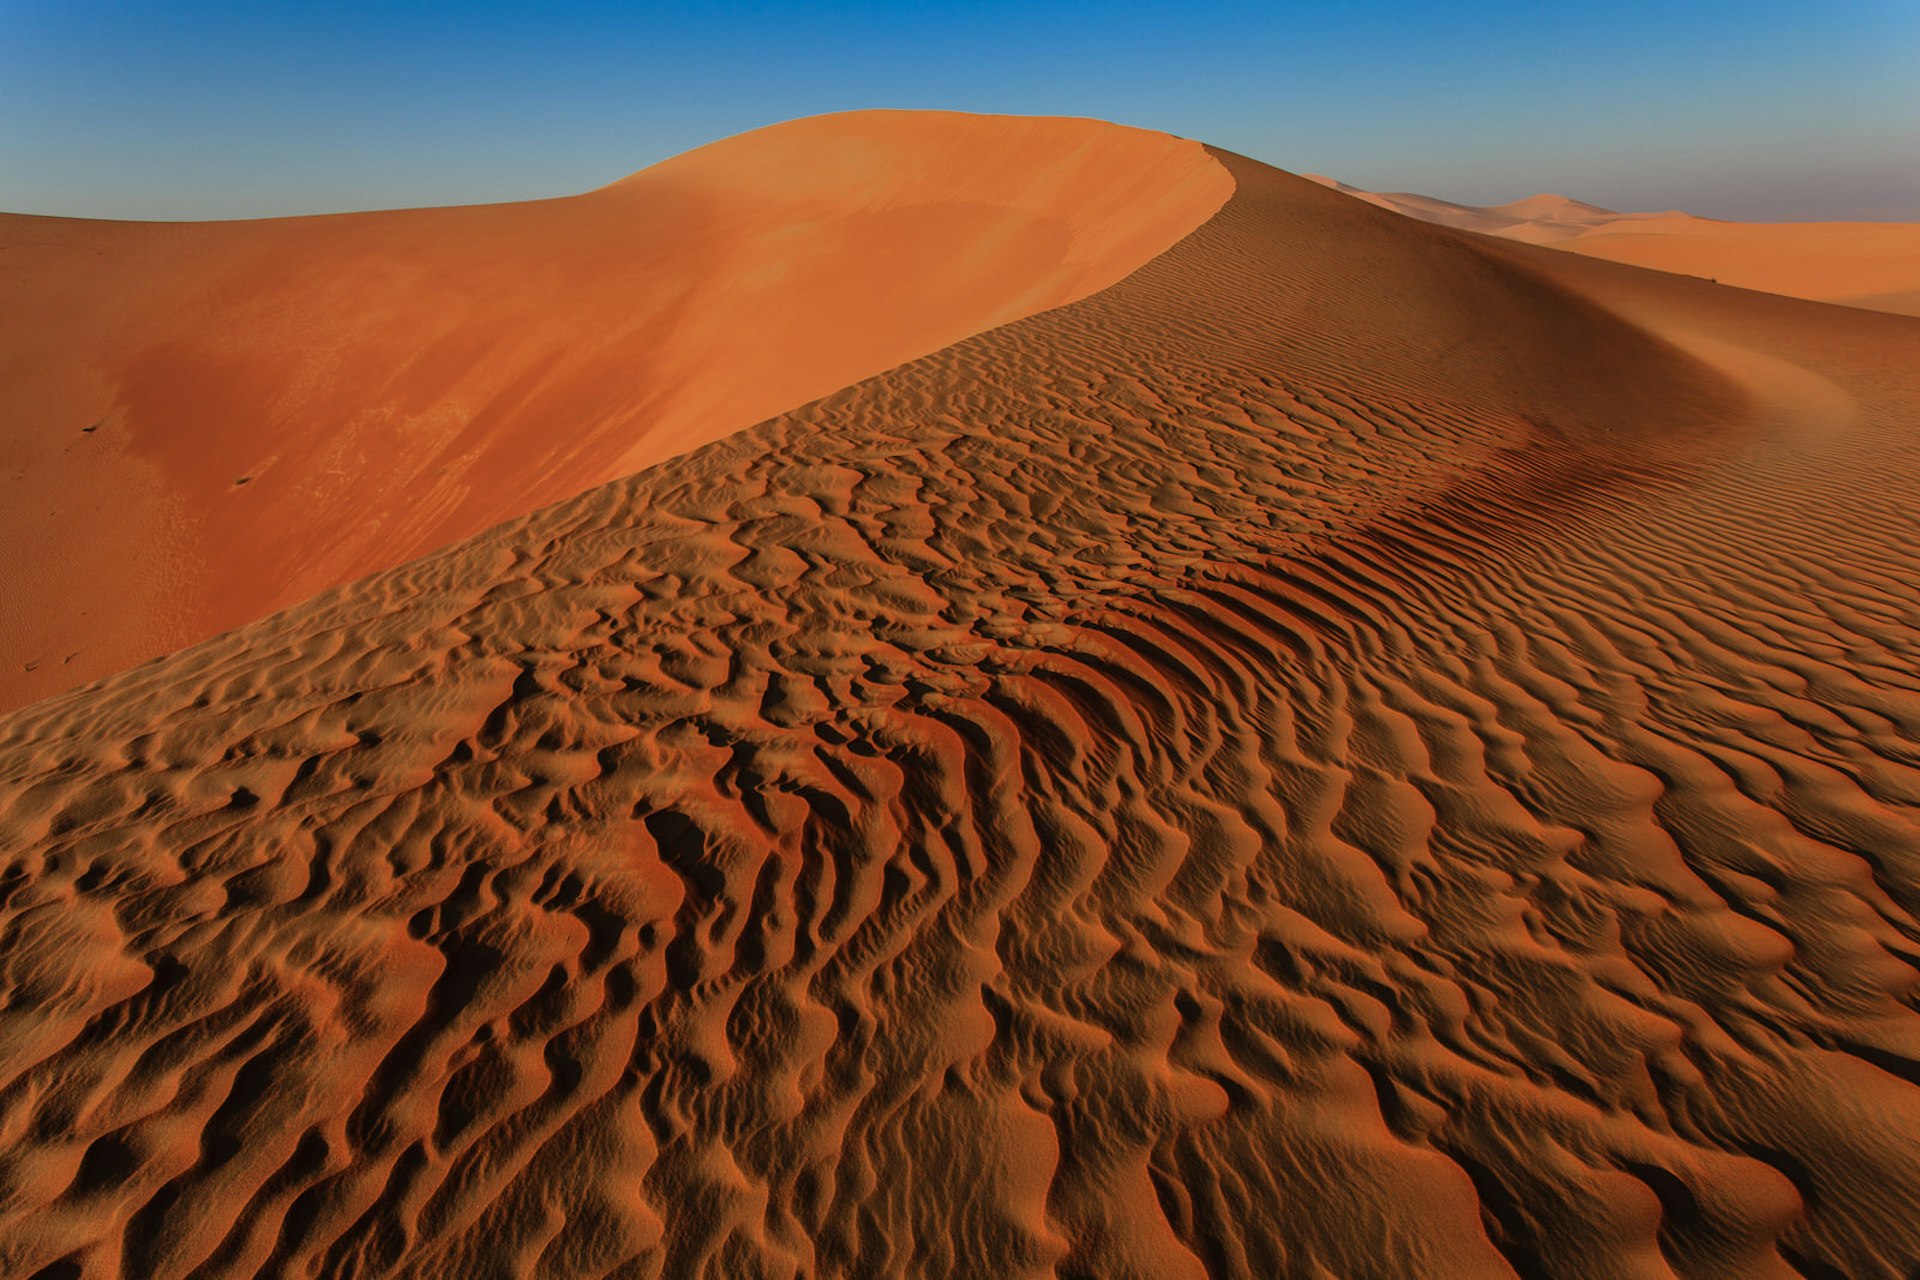 Ripples of sand lead towards the top of a rust-colored dune in the Empty Quarter